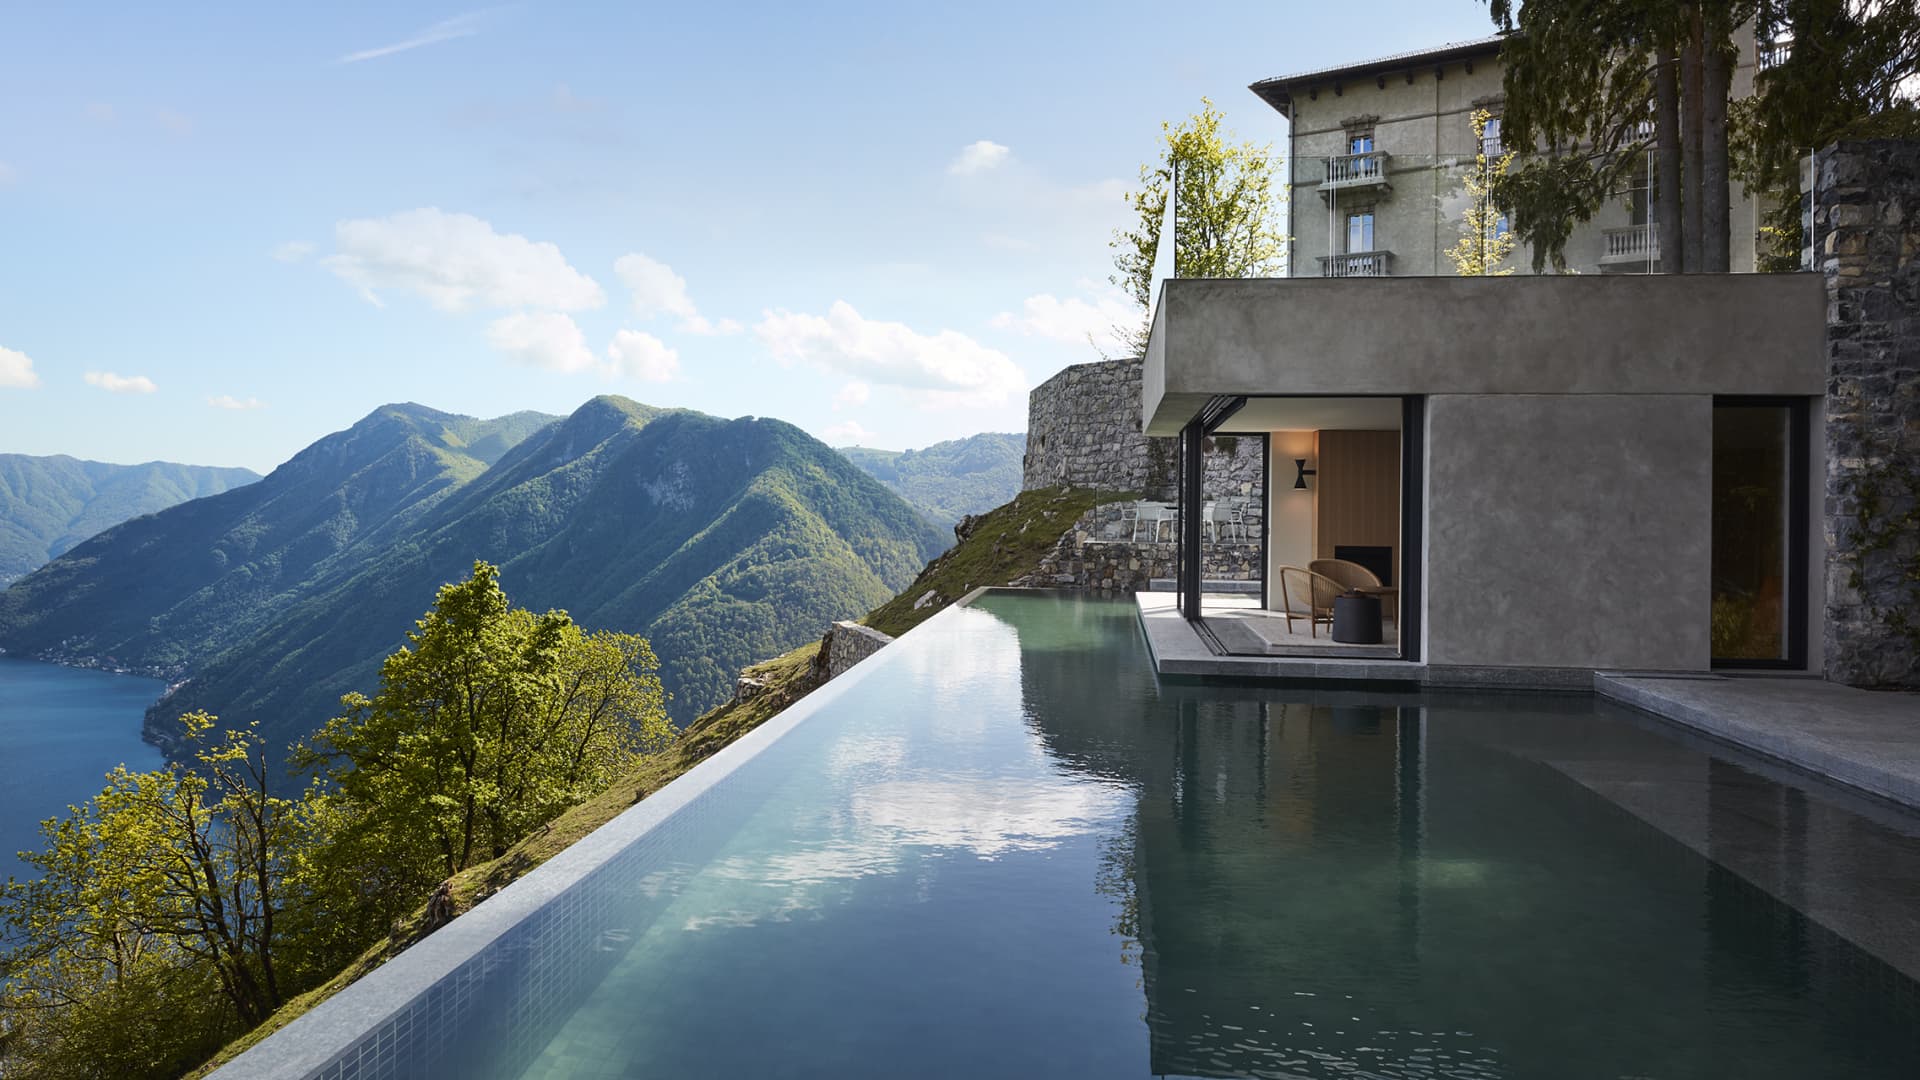 Views over Italy's Lake Como from a luxury villa vacation rental.